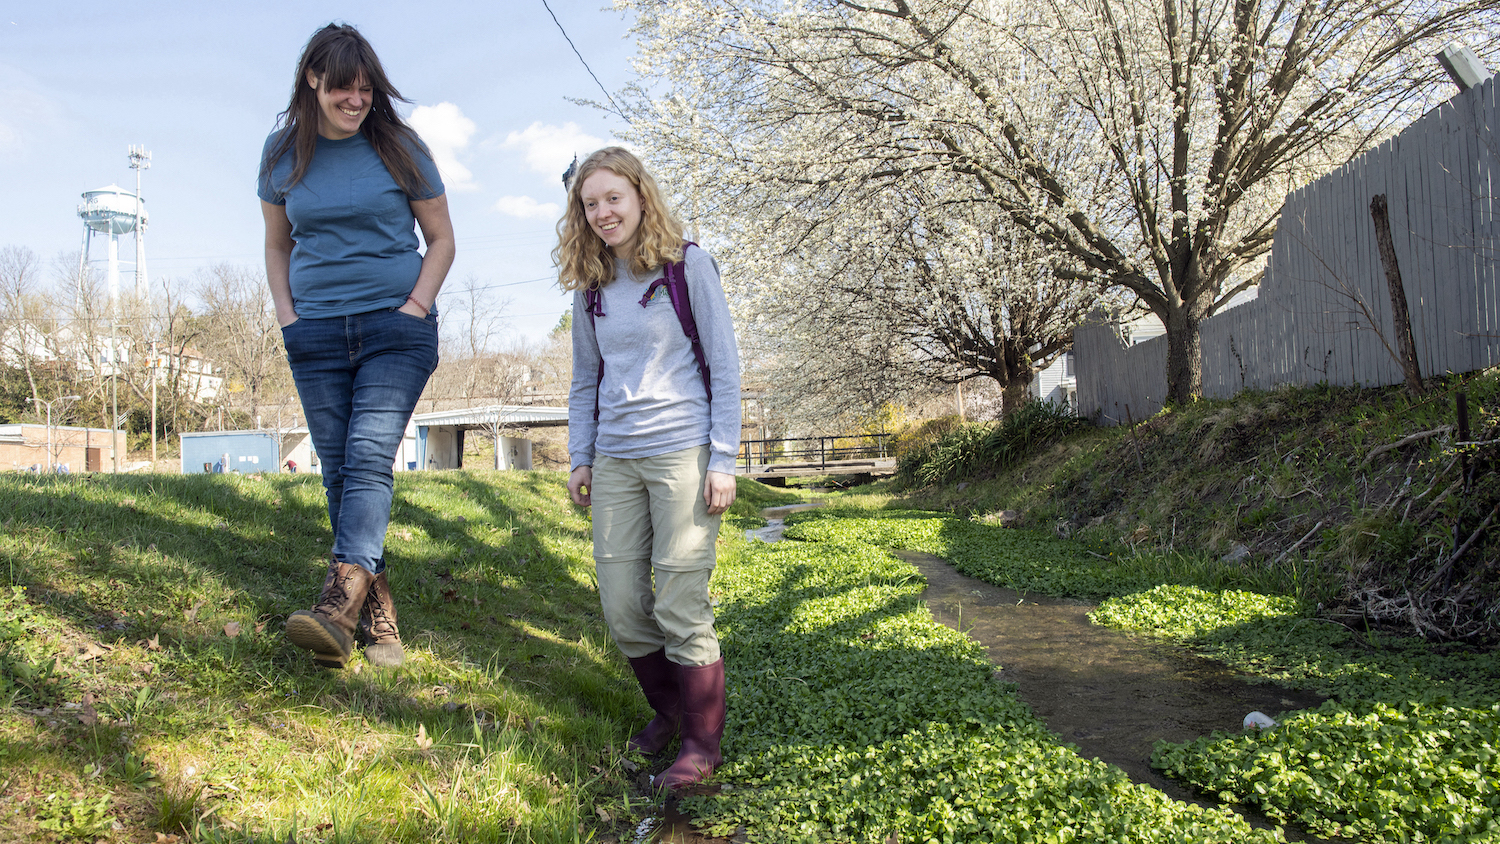 Julia Sargent and Maggie Walker walk side by side on the grass near a creek near a city street.